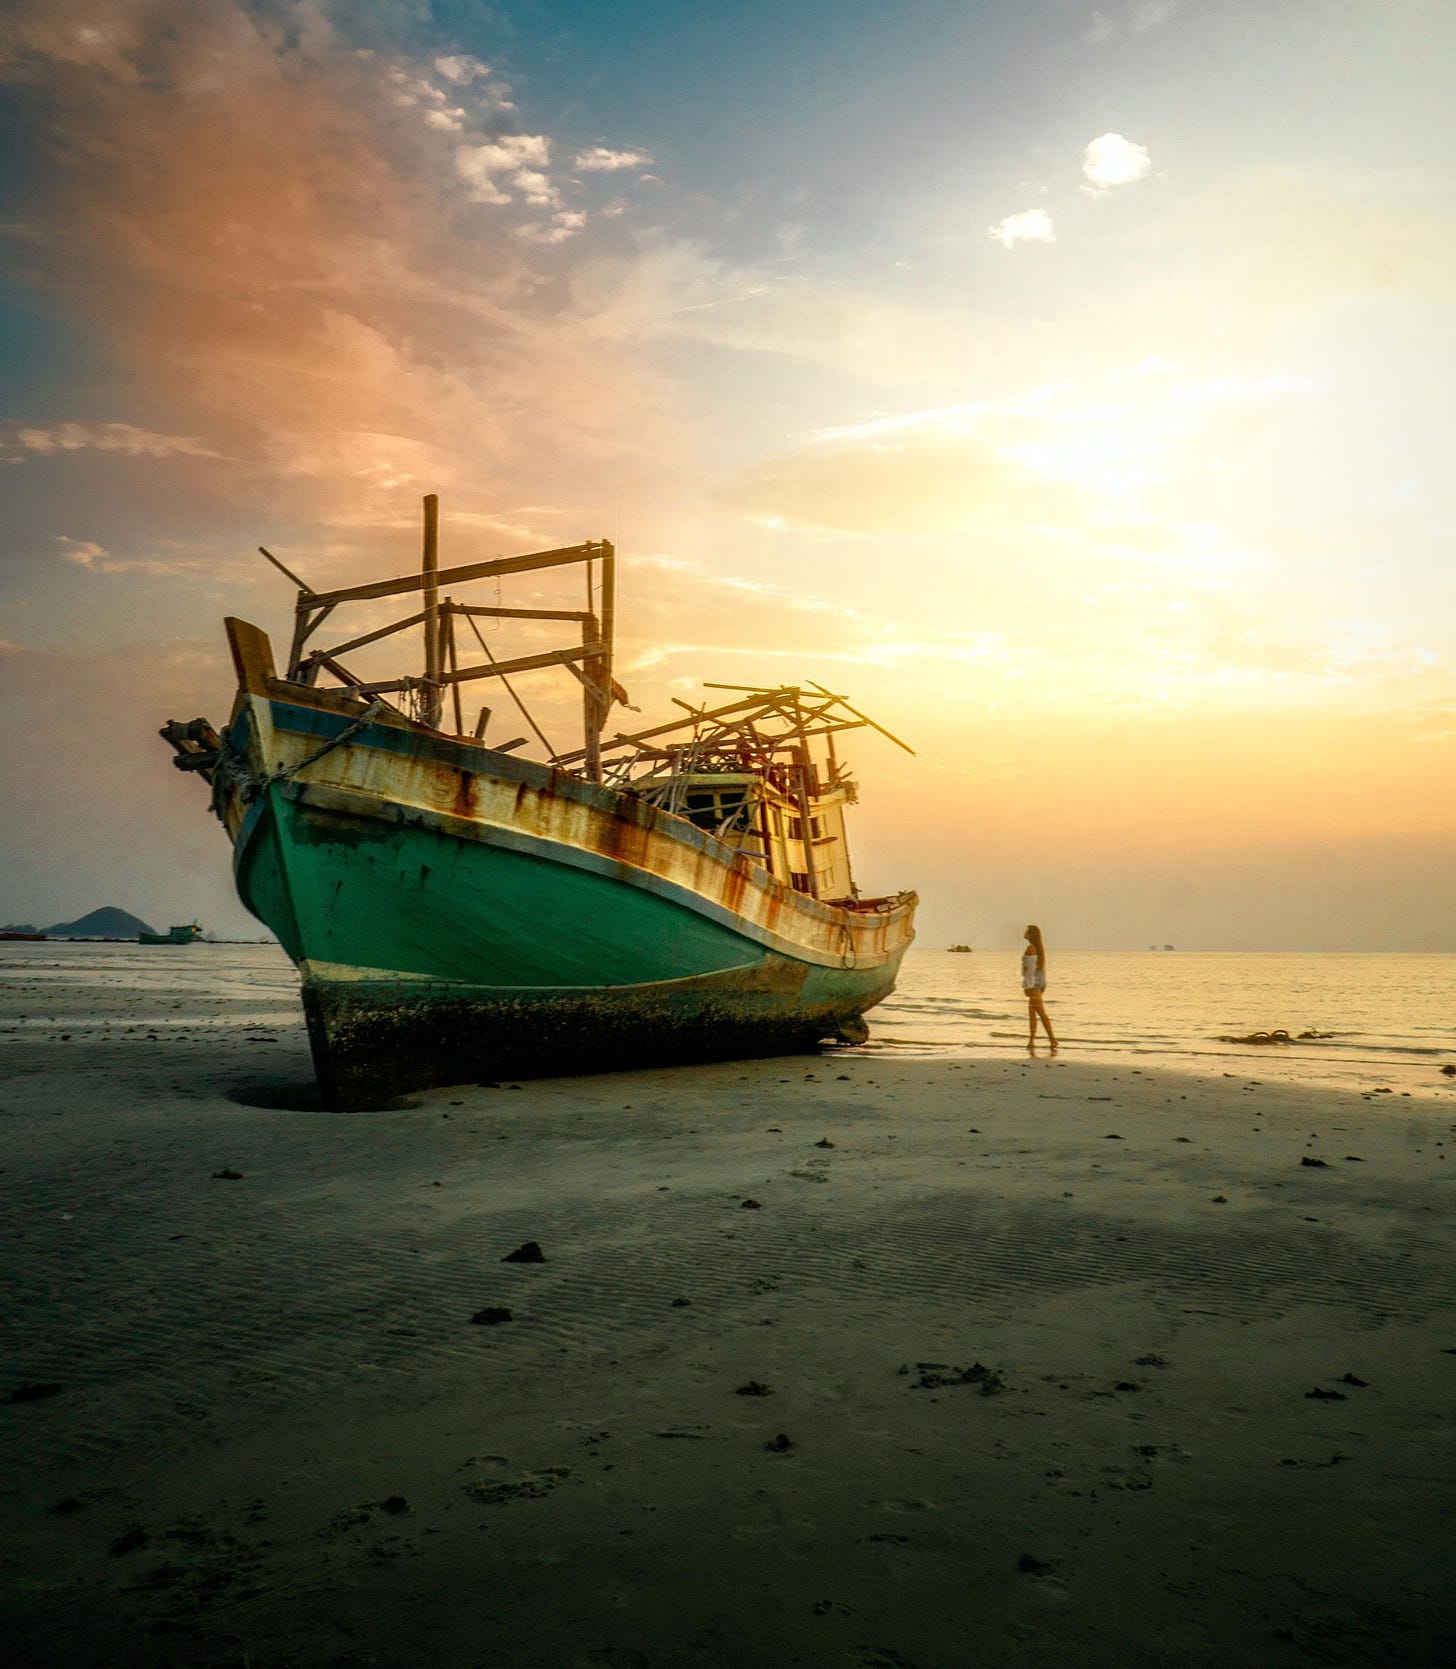 Photo of beached ship by Serinus from Pexels